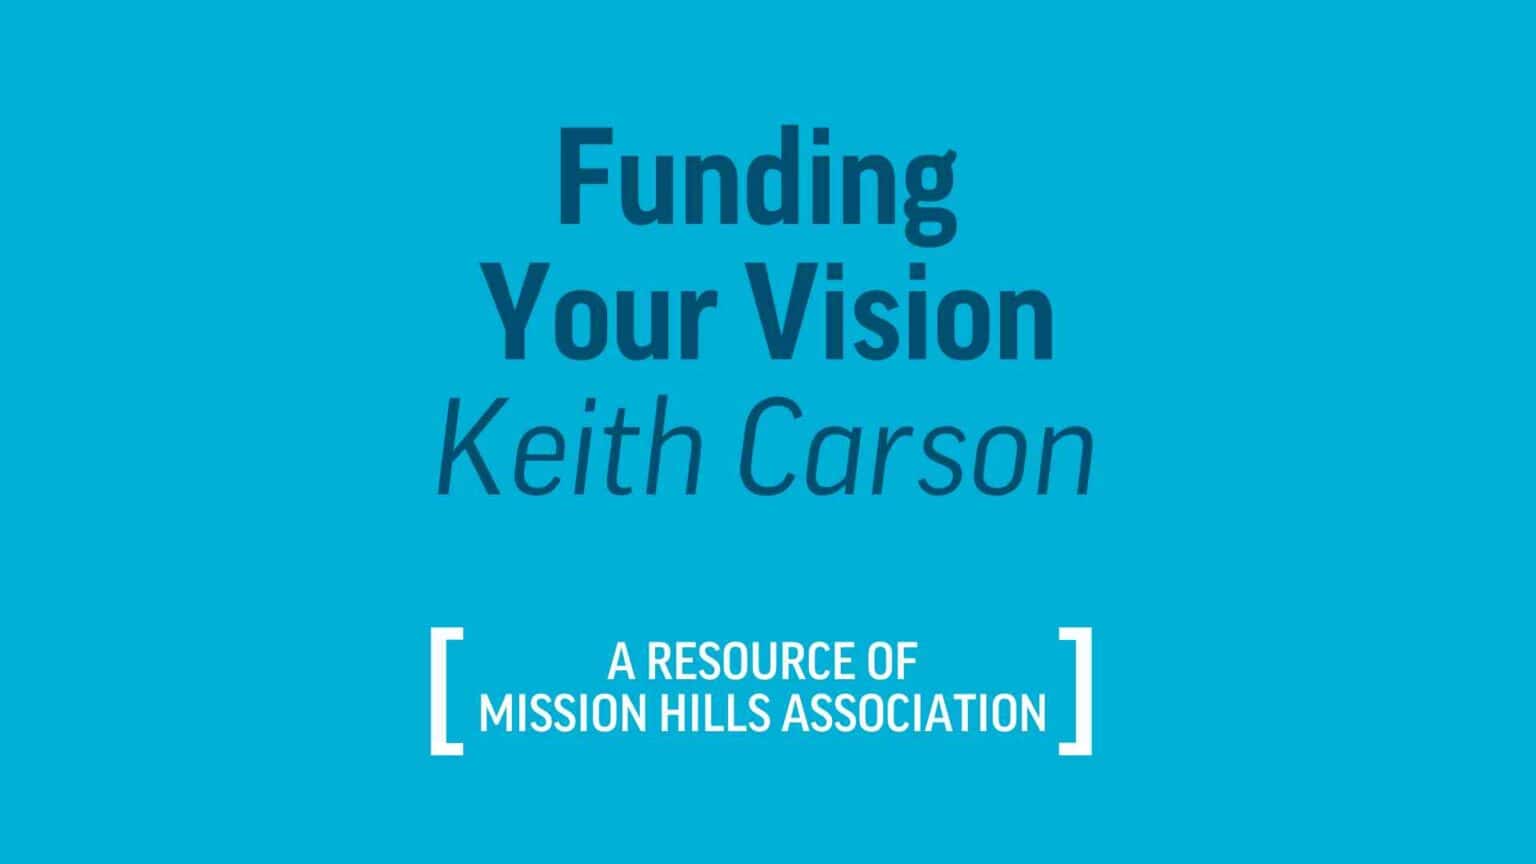 Funding Your Vision | Keith Carson